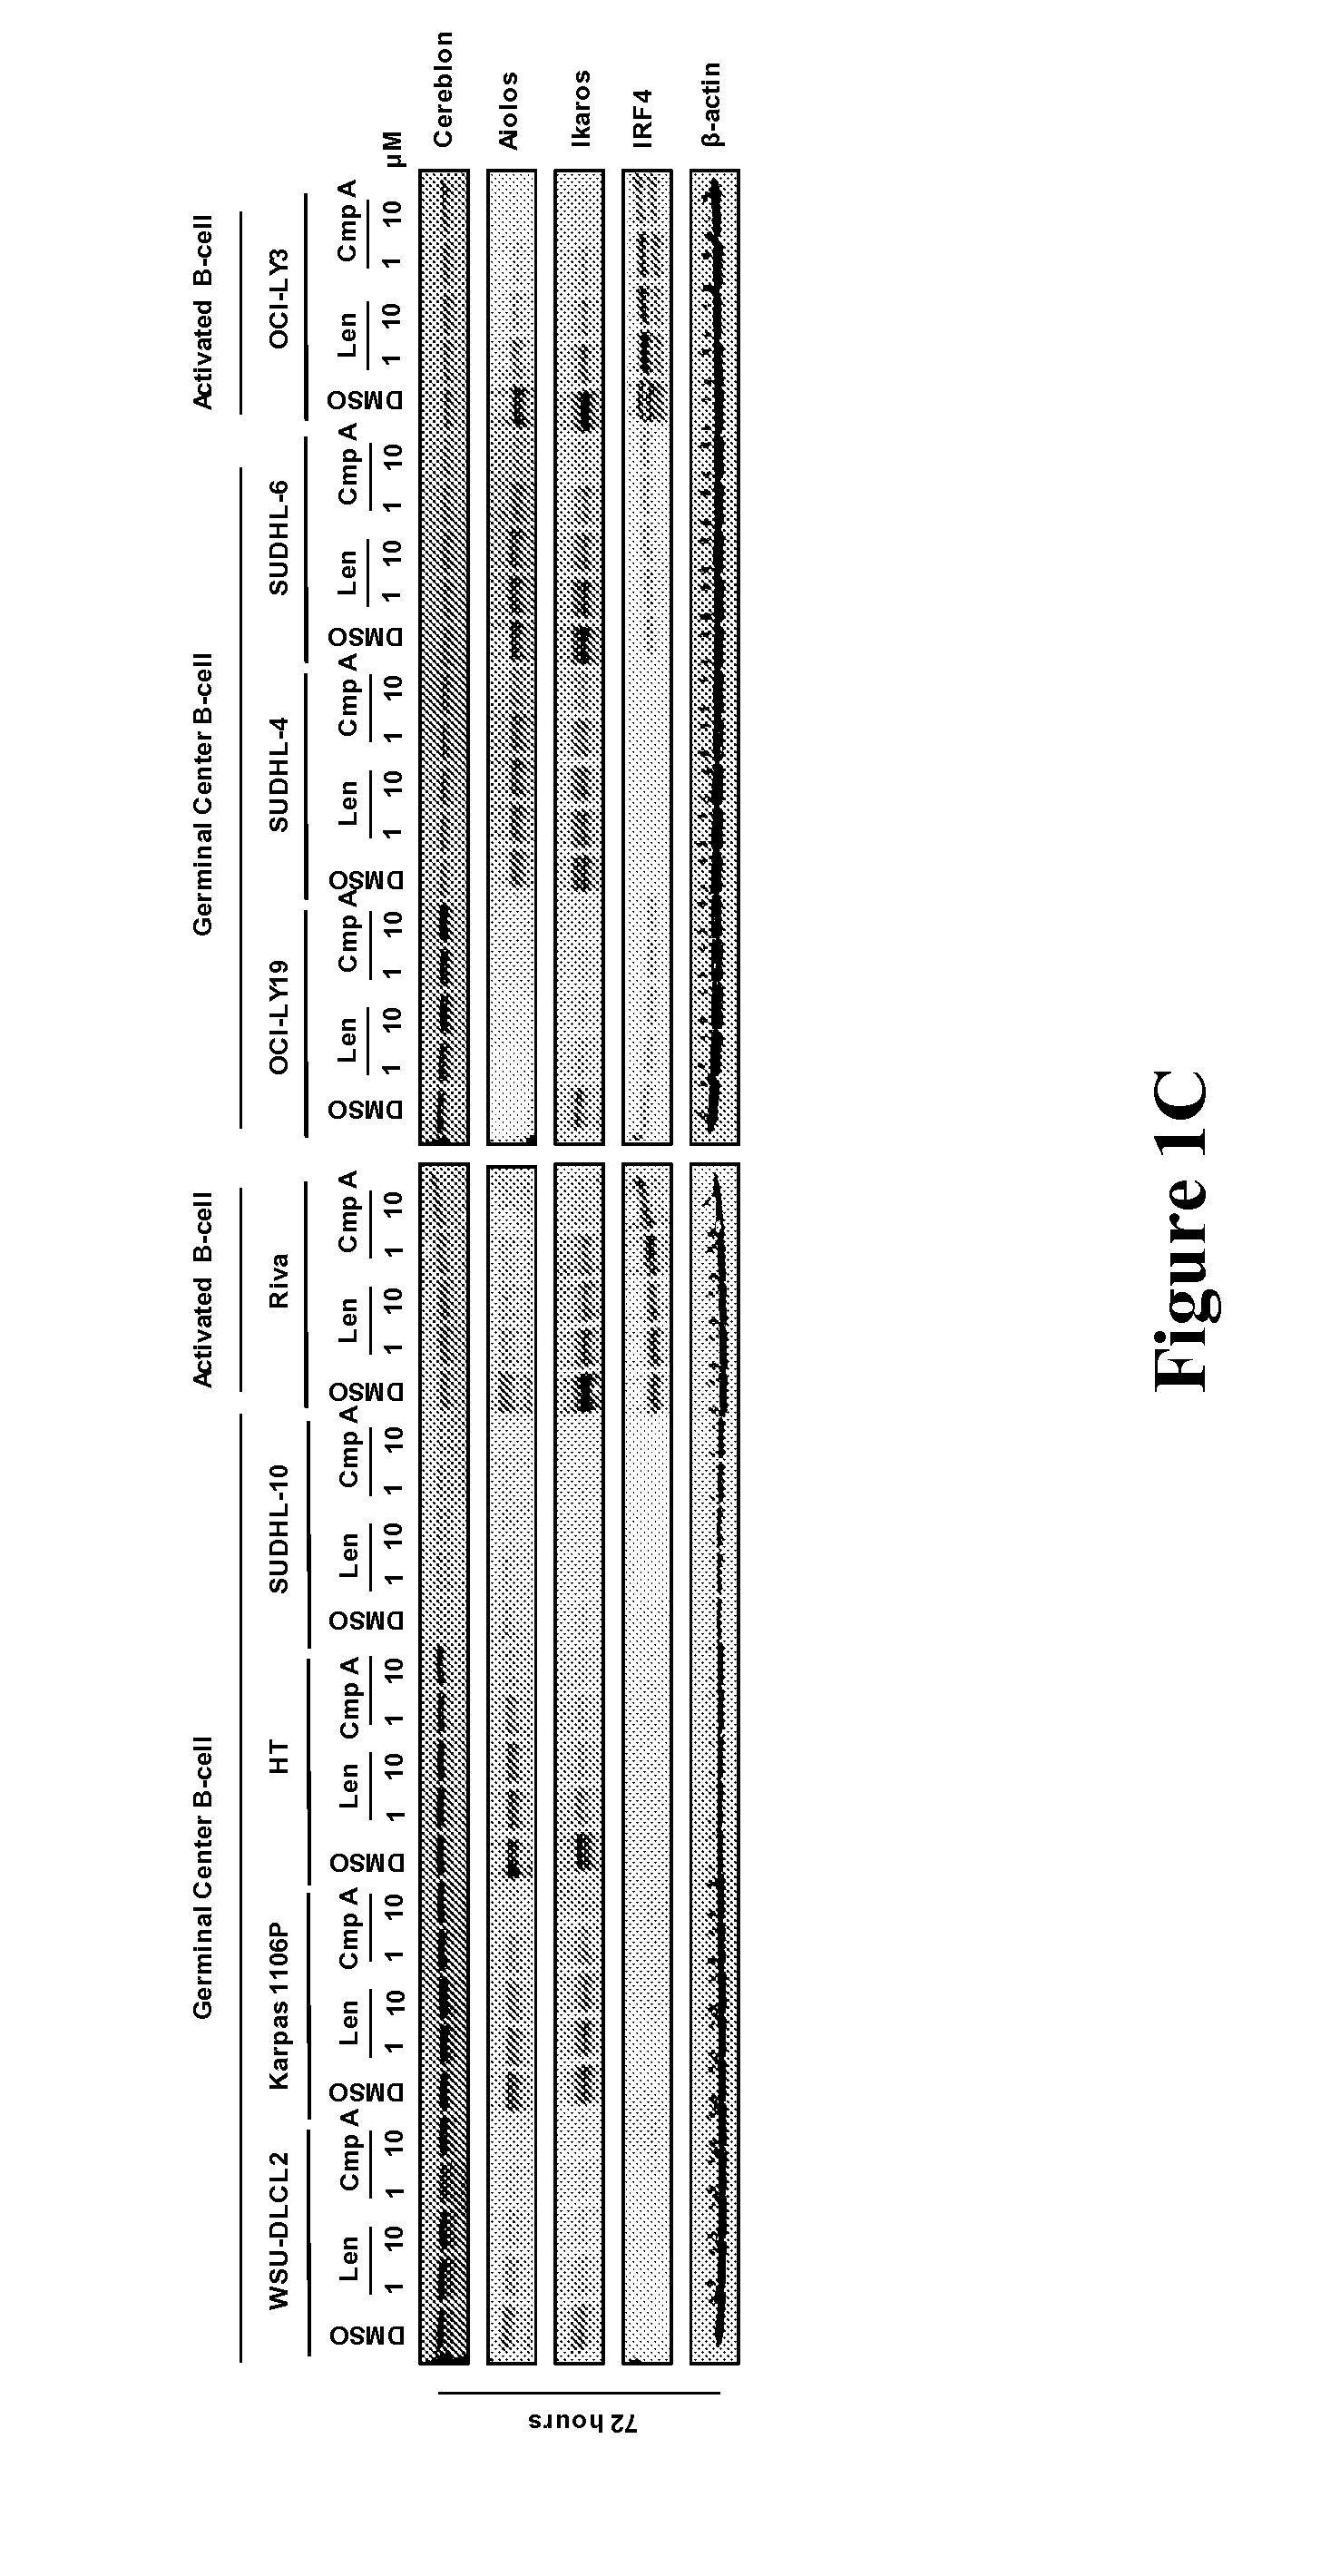 Methods for determining drug efficacy for the treatment of diffuse large b-cell lymphoma, multiple myeloma, and myeloid cancers